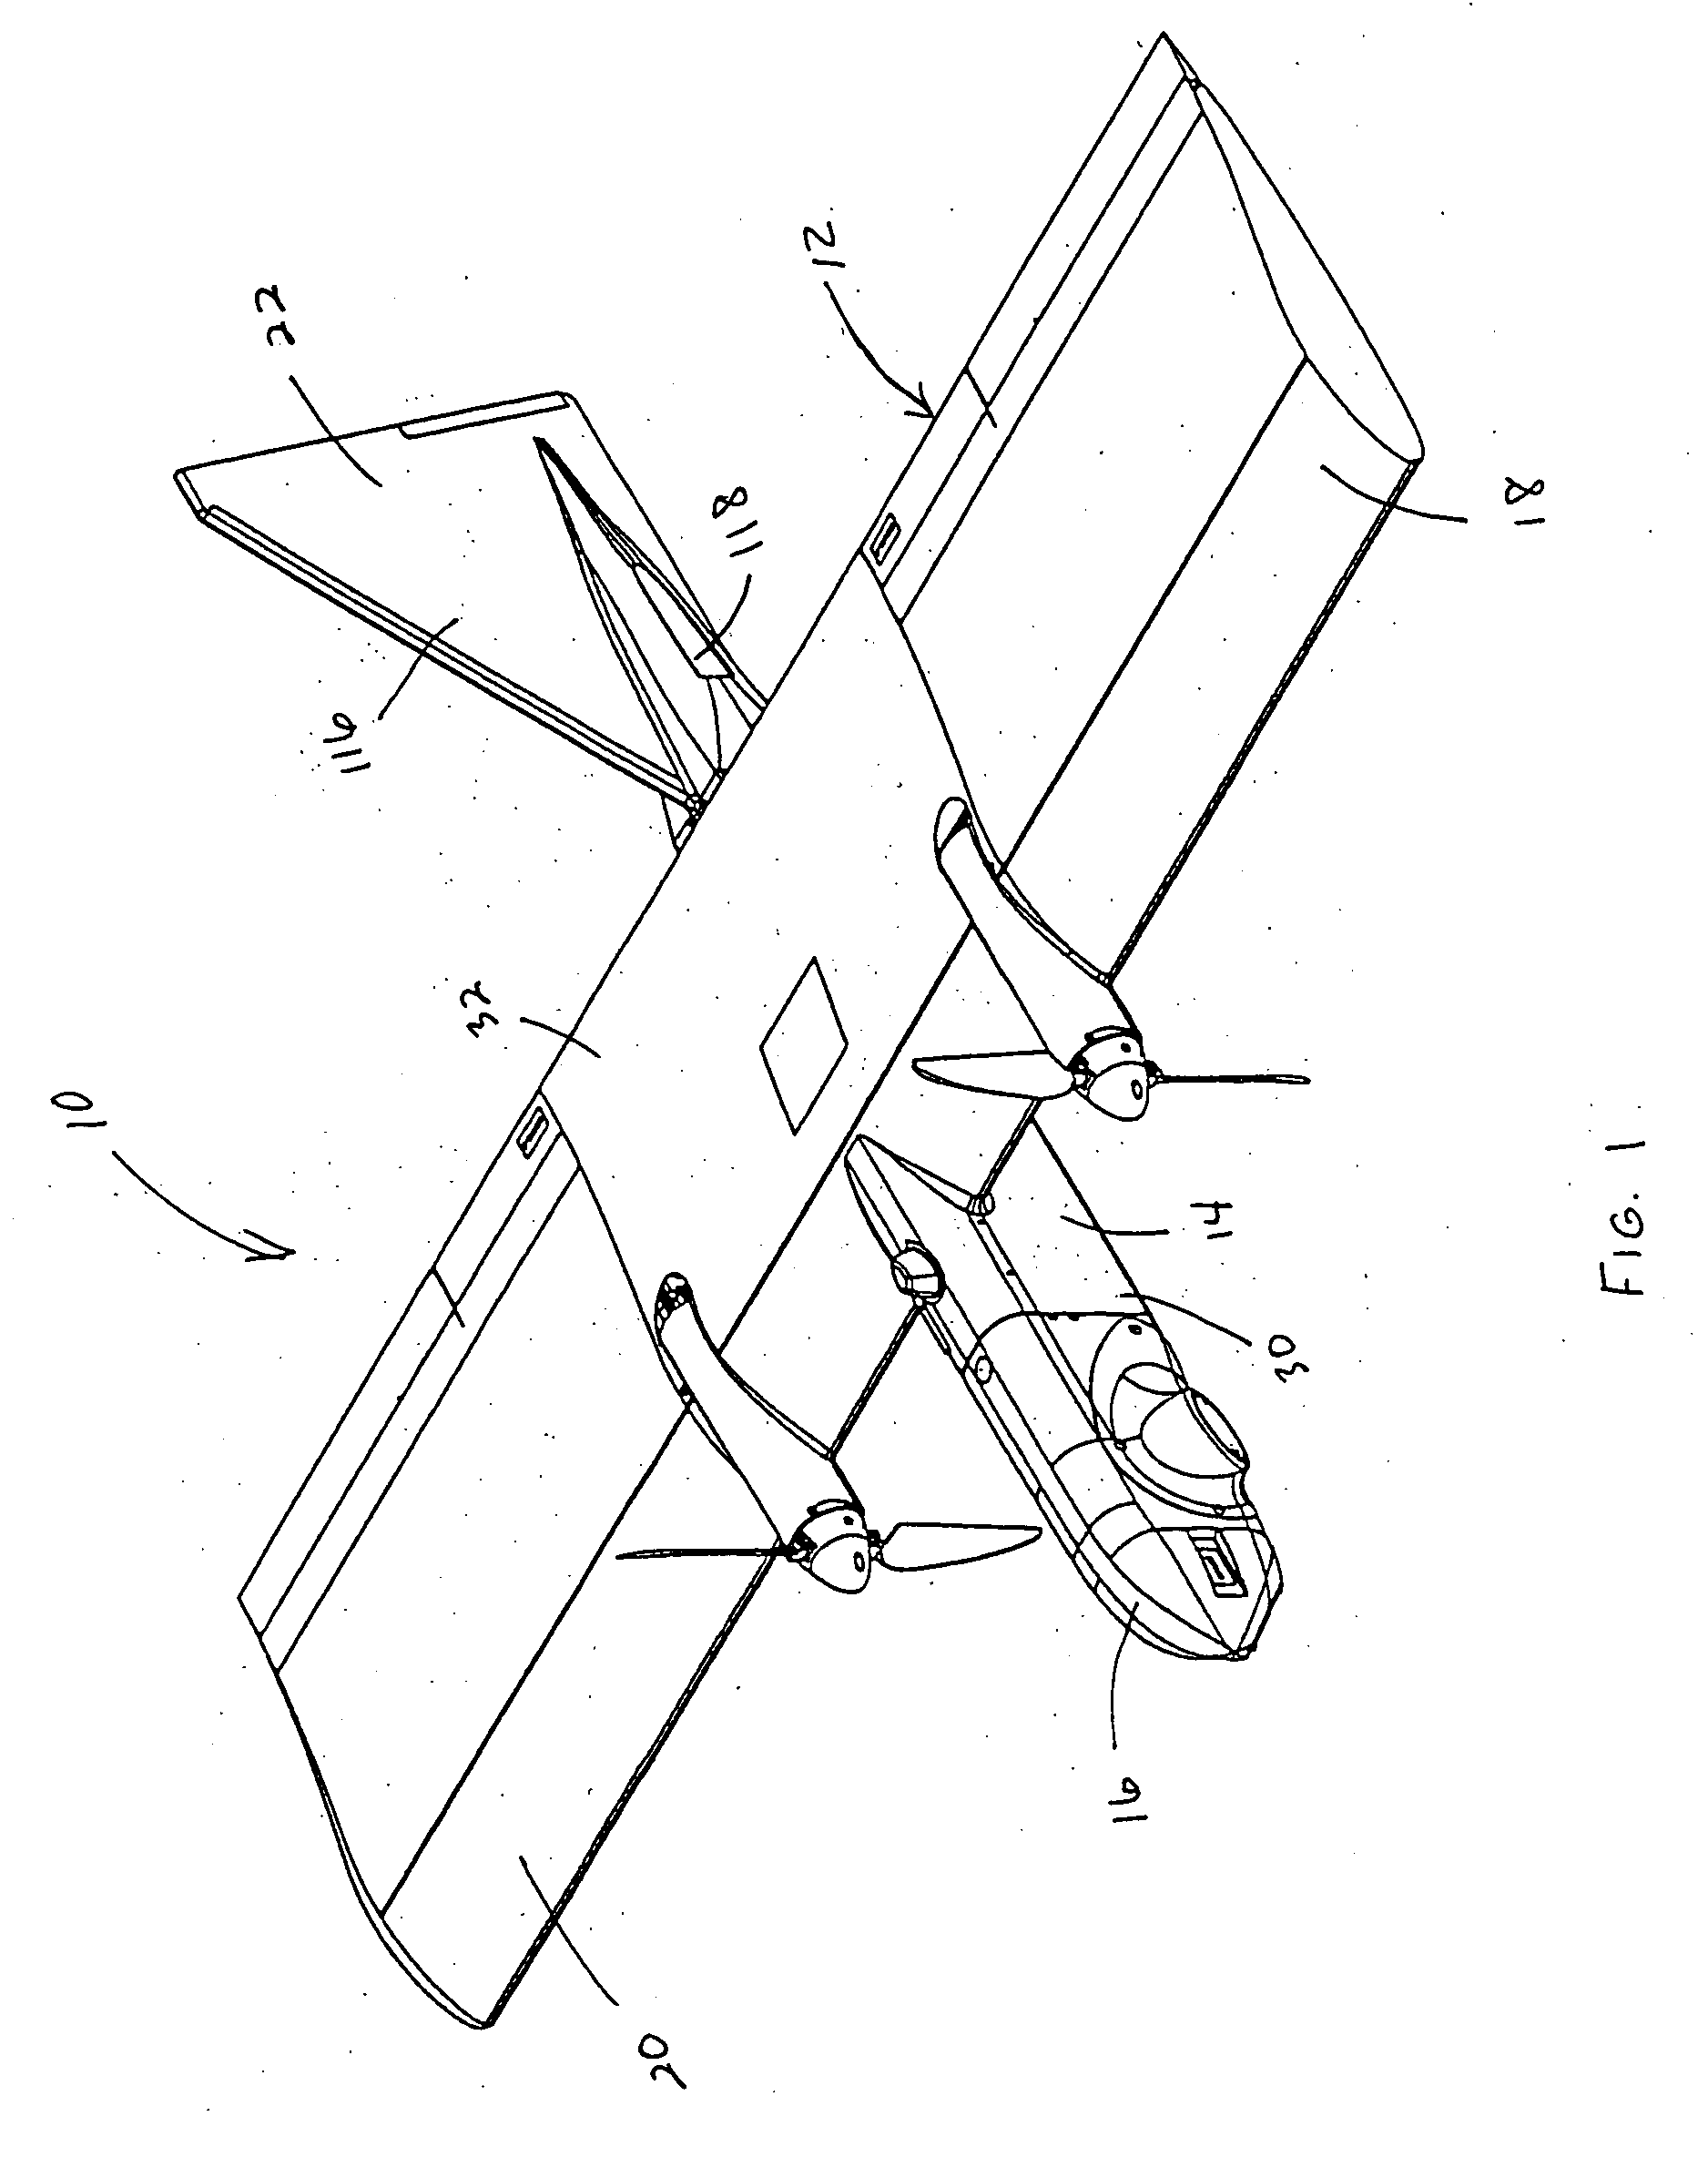 Autonomous, back-packable computer-controlled breakaway unmanned aerial vehicle (UAV)